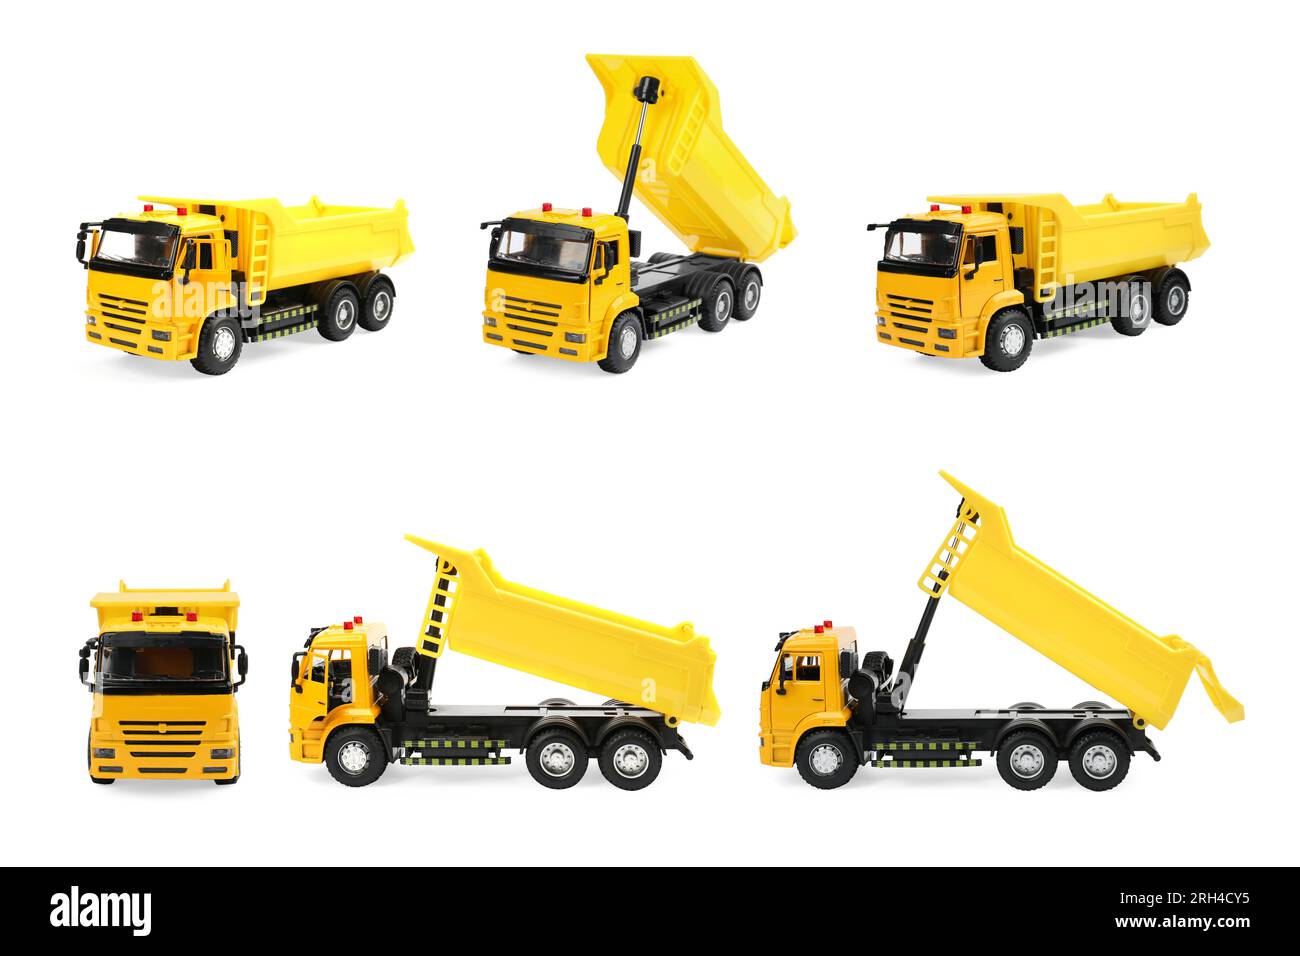 Yellow truck isolated on white, different angles. Collage design with children's toy Stock Photo